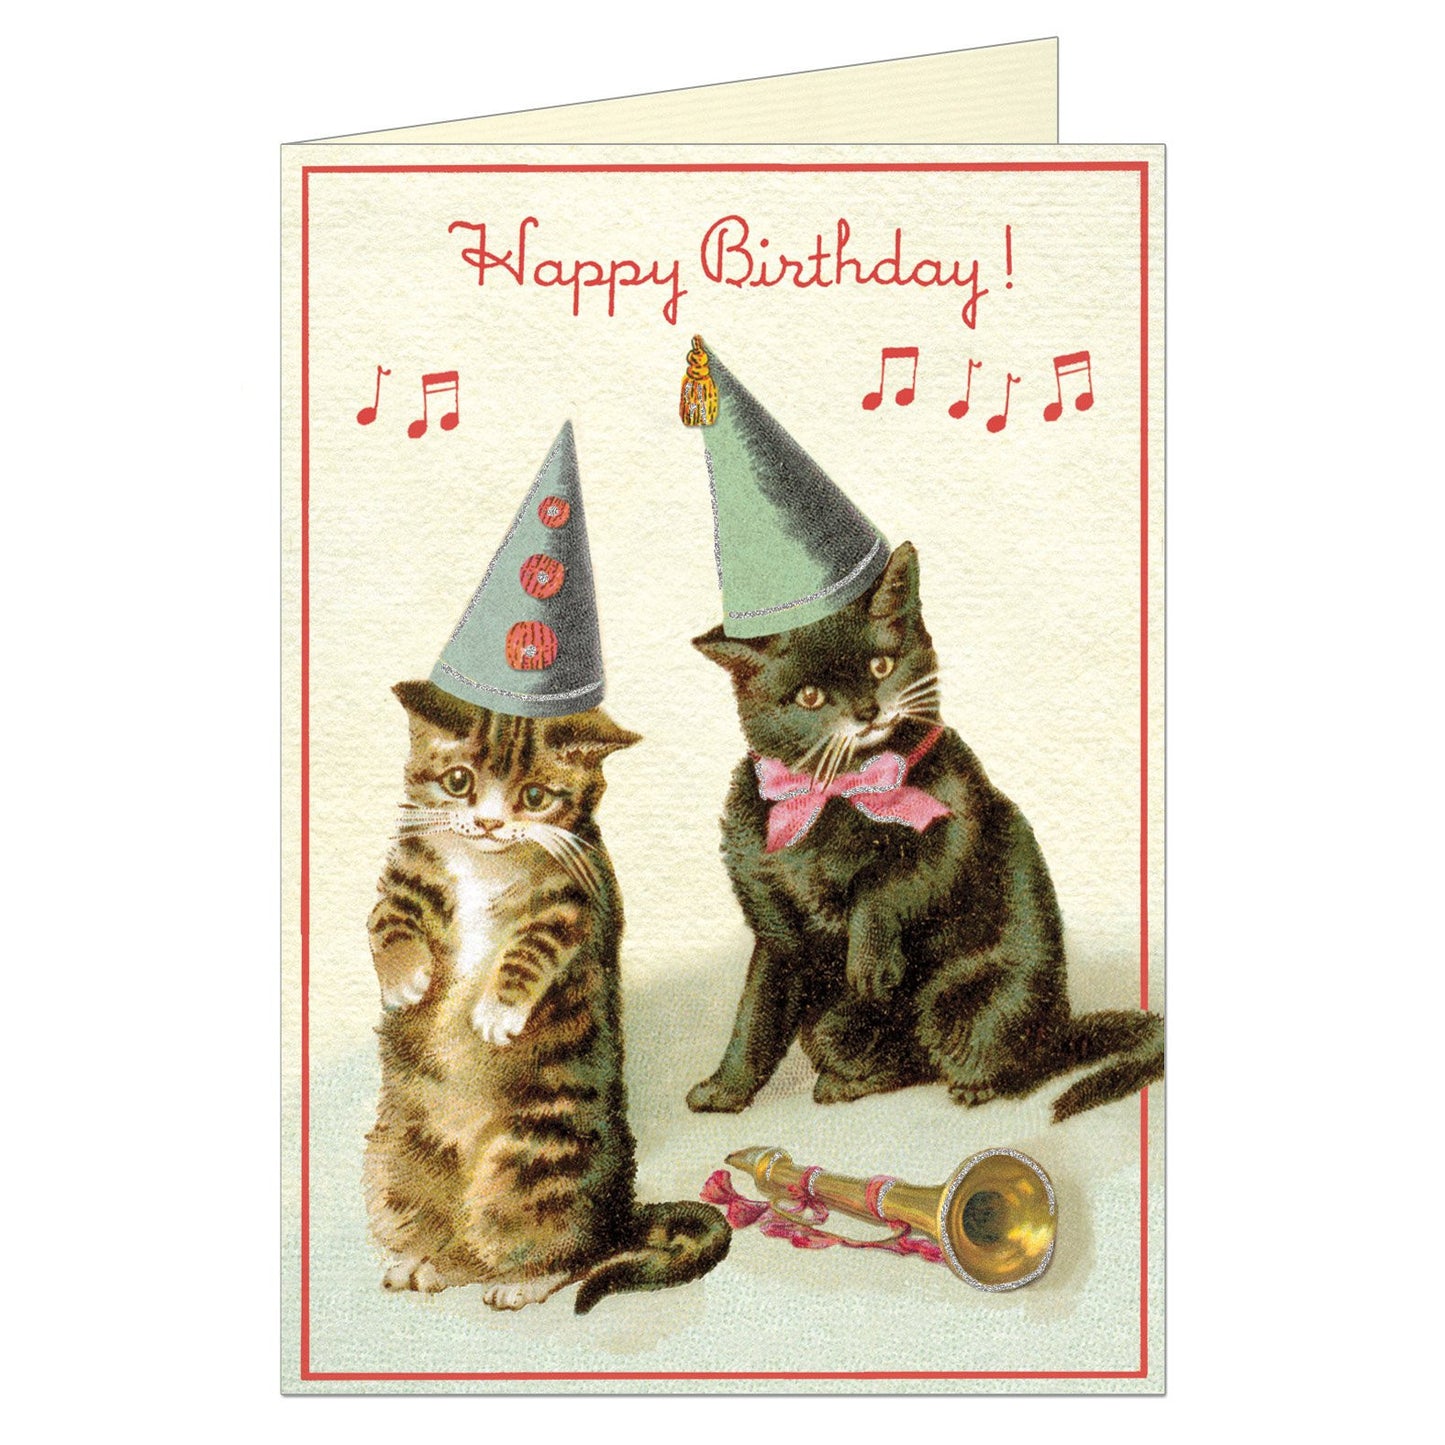 Vintage birthday card featuring two kitties wearing hats near a trumpet.